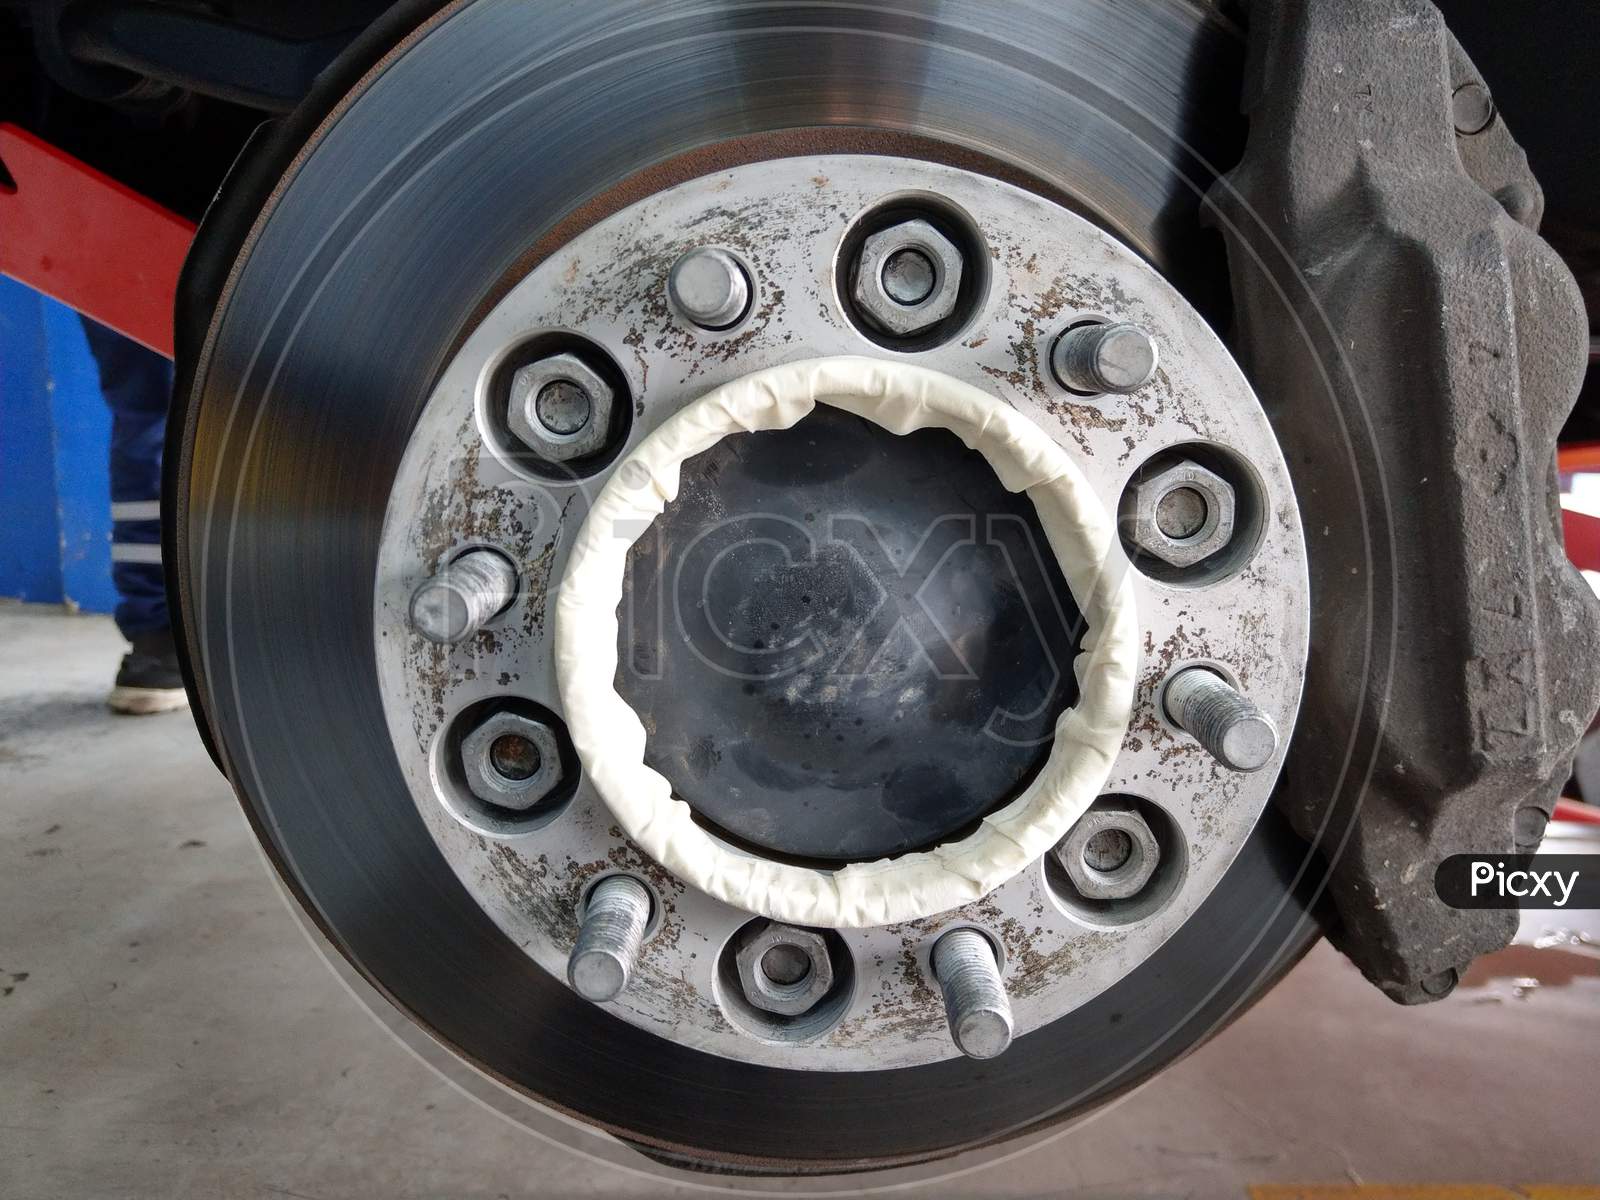 wheel spacer fixed on the wheel hub of a SUV vehicle.